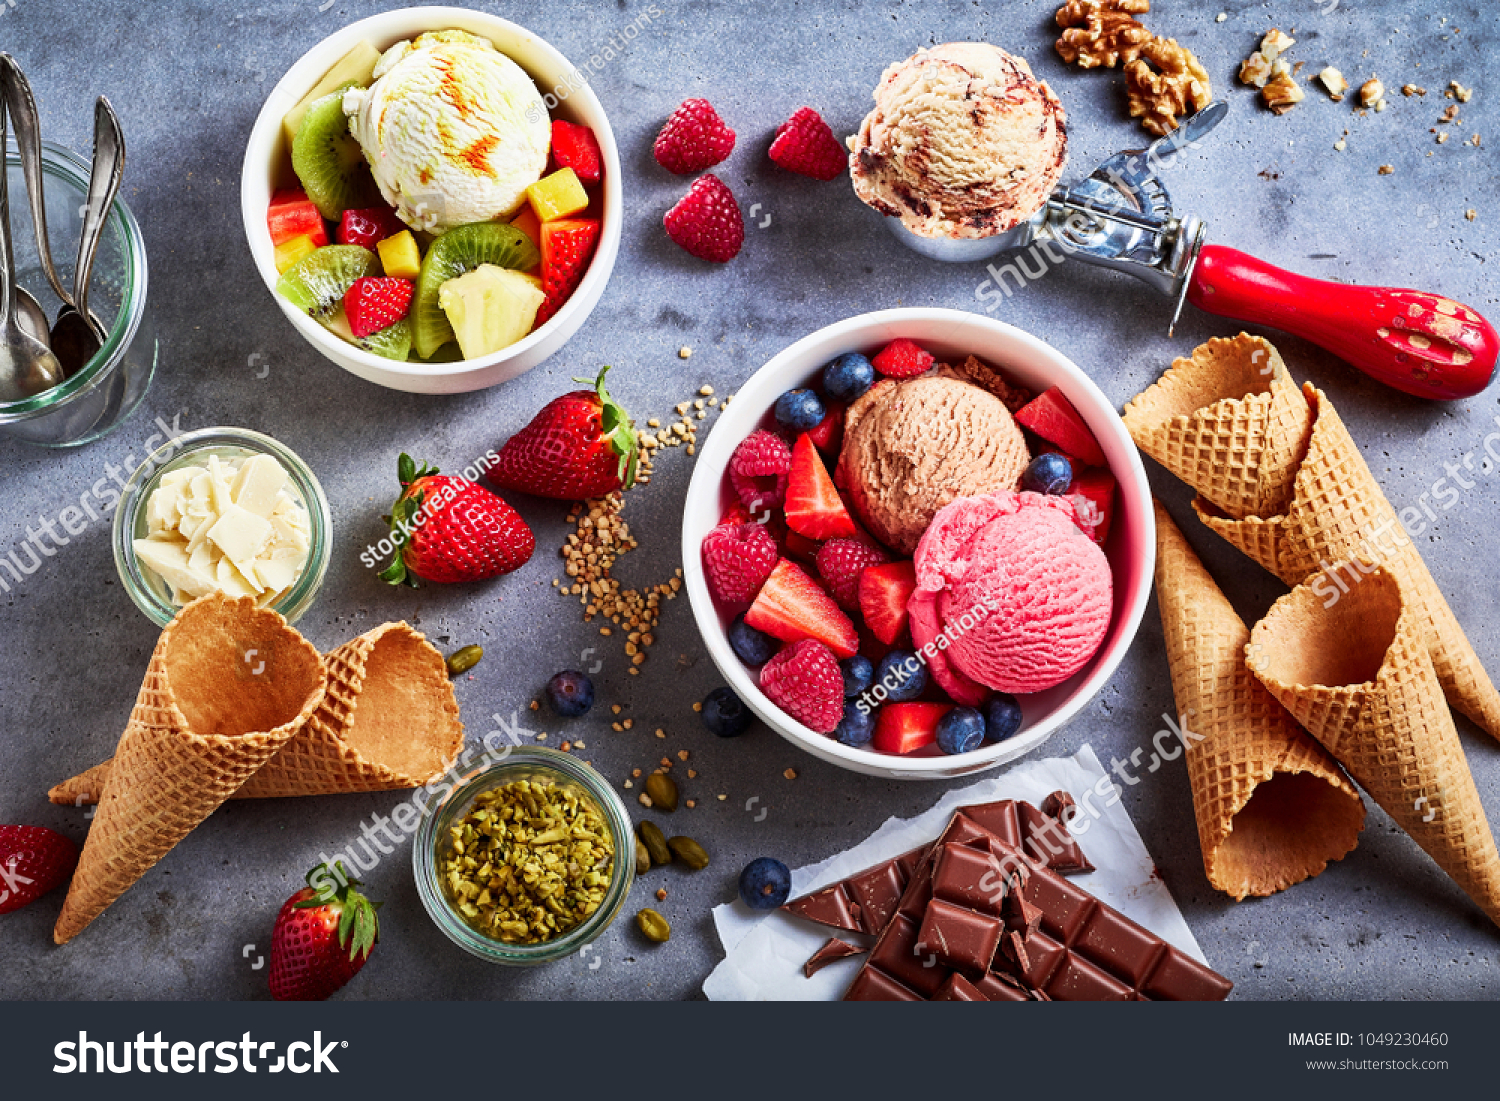 Fresh fruit with scoops of creamy speciality ice cream in assorted flavors with raspberry, berry, blueberry, strawberry, walnut , pistachio, chocolate, sugar cones and a scoop for serving from above #1049230460